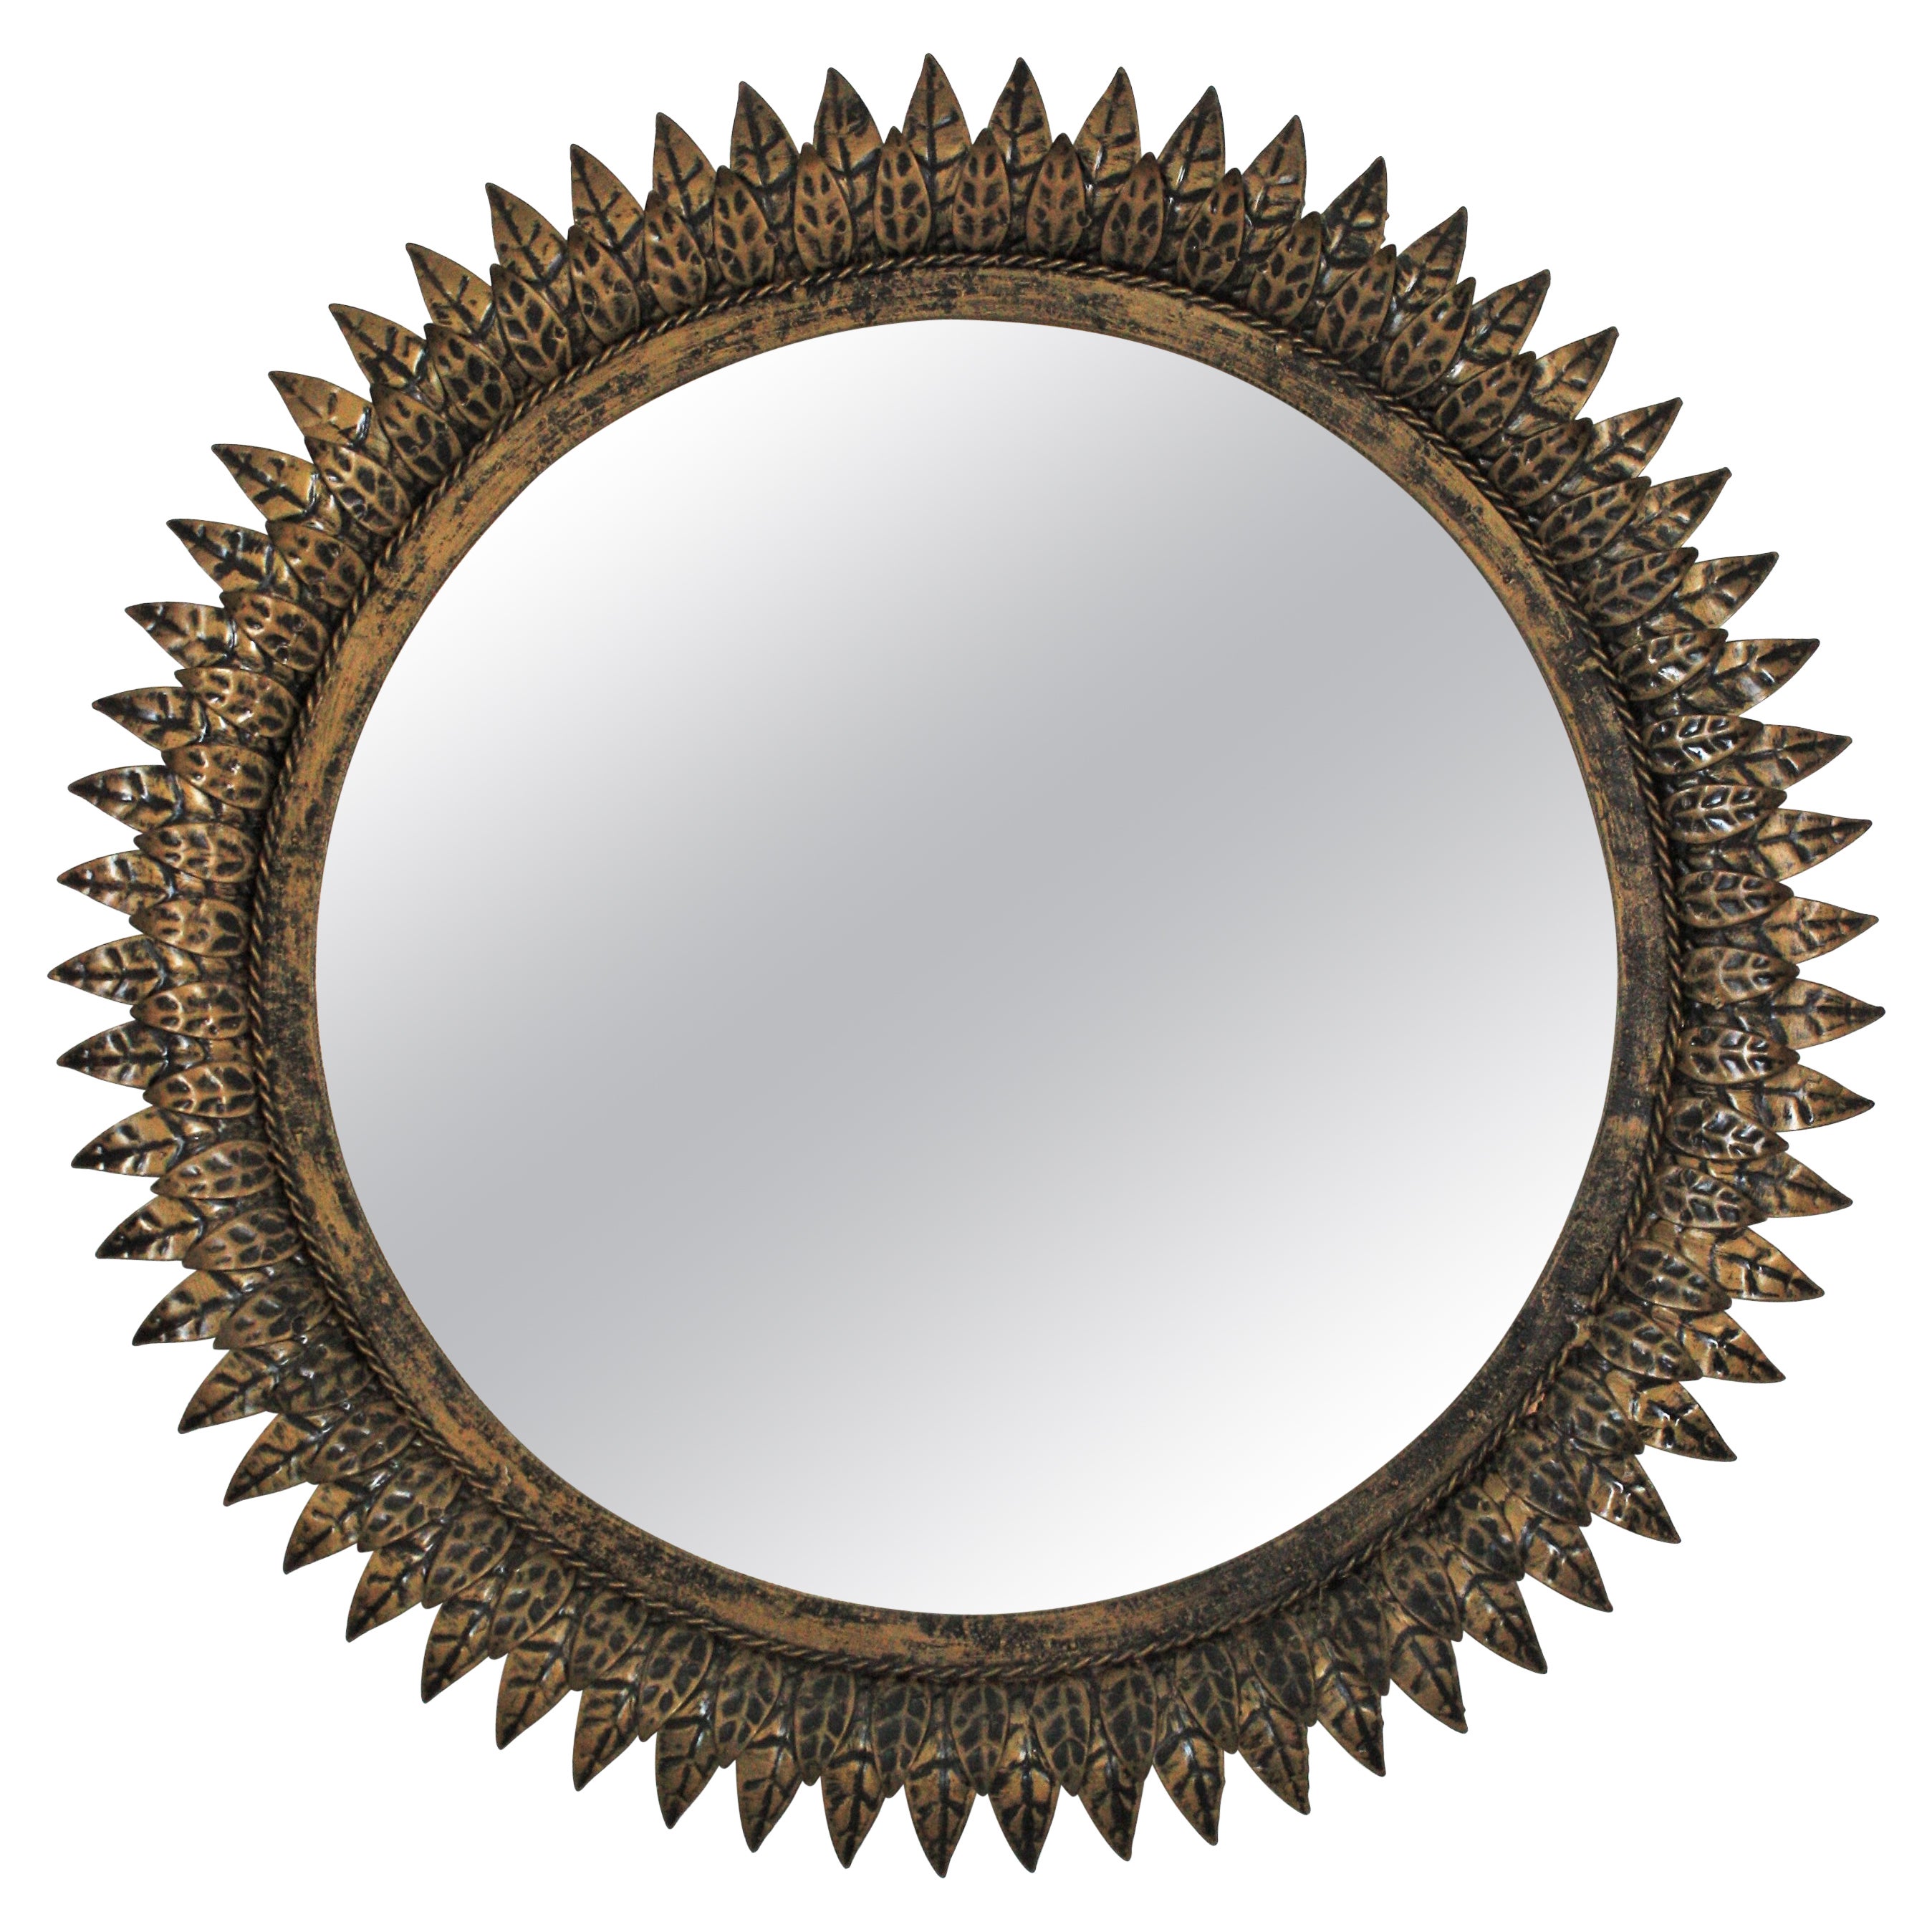 French Sunburst Mirror in Patinated Metal, Style of Line Vautrin